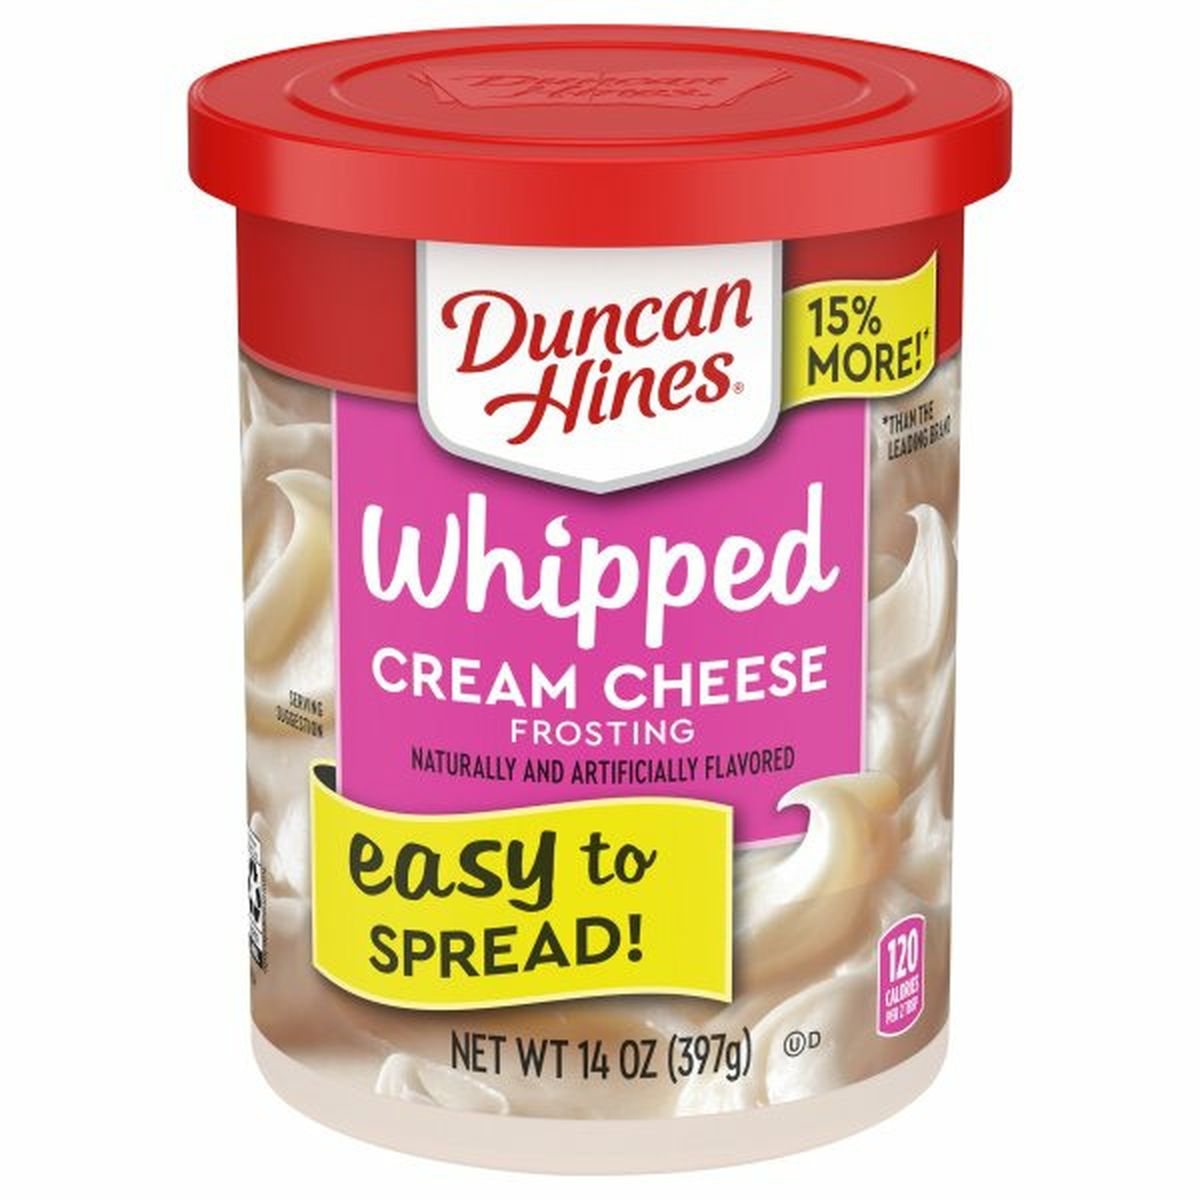 Calories in Duncan Hines Whipped Frosting, Cream Cheese